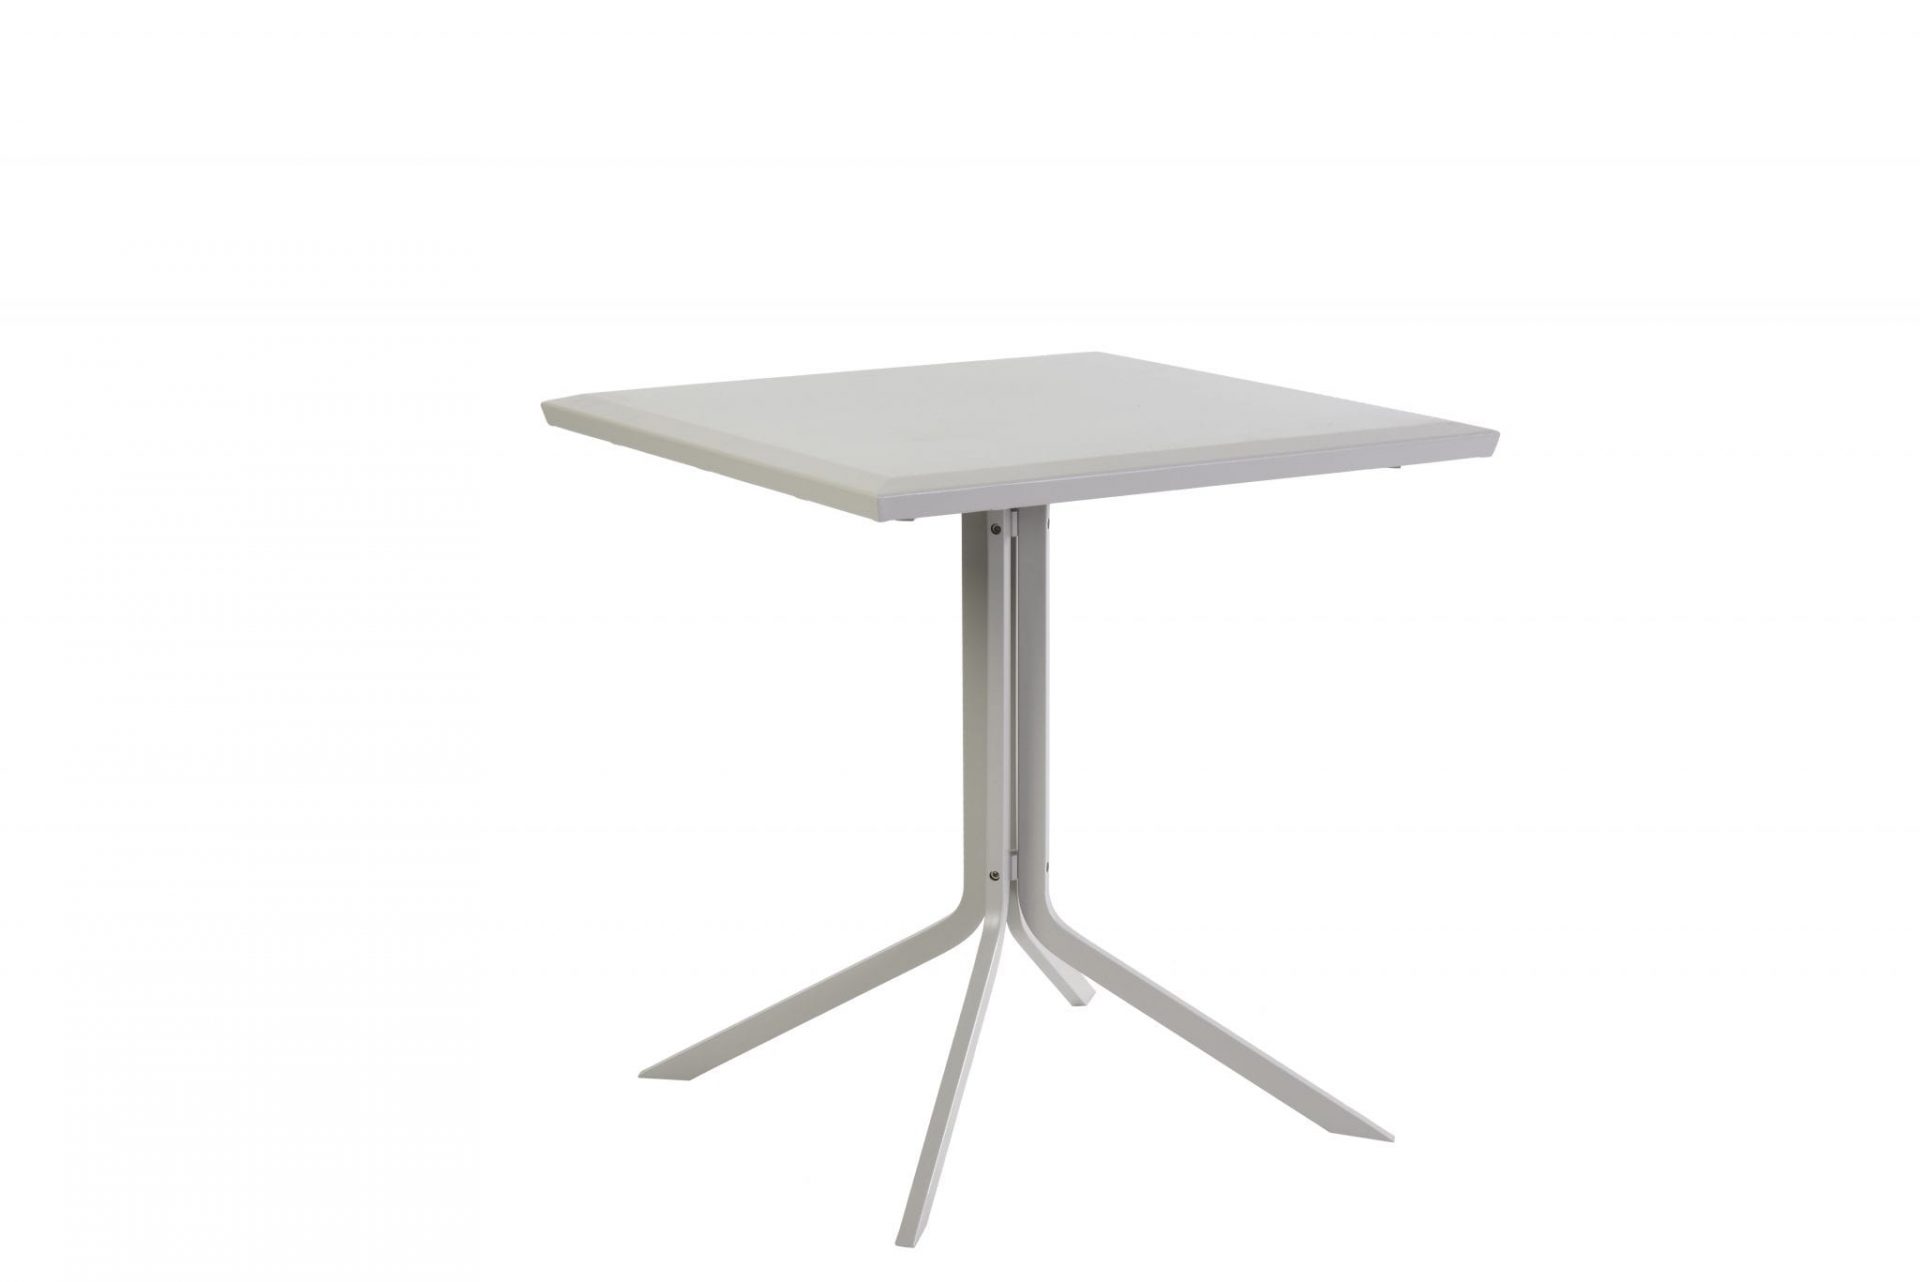 products-2017_max_luuk_m2031_stripe_table-1920x1282